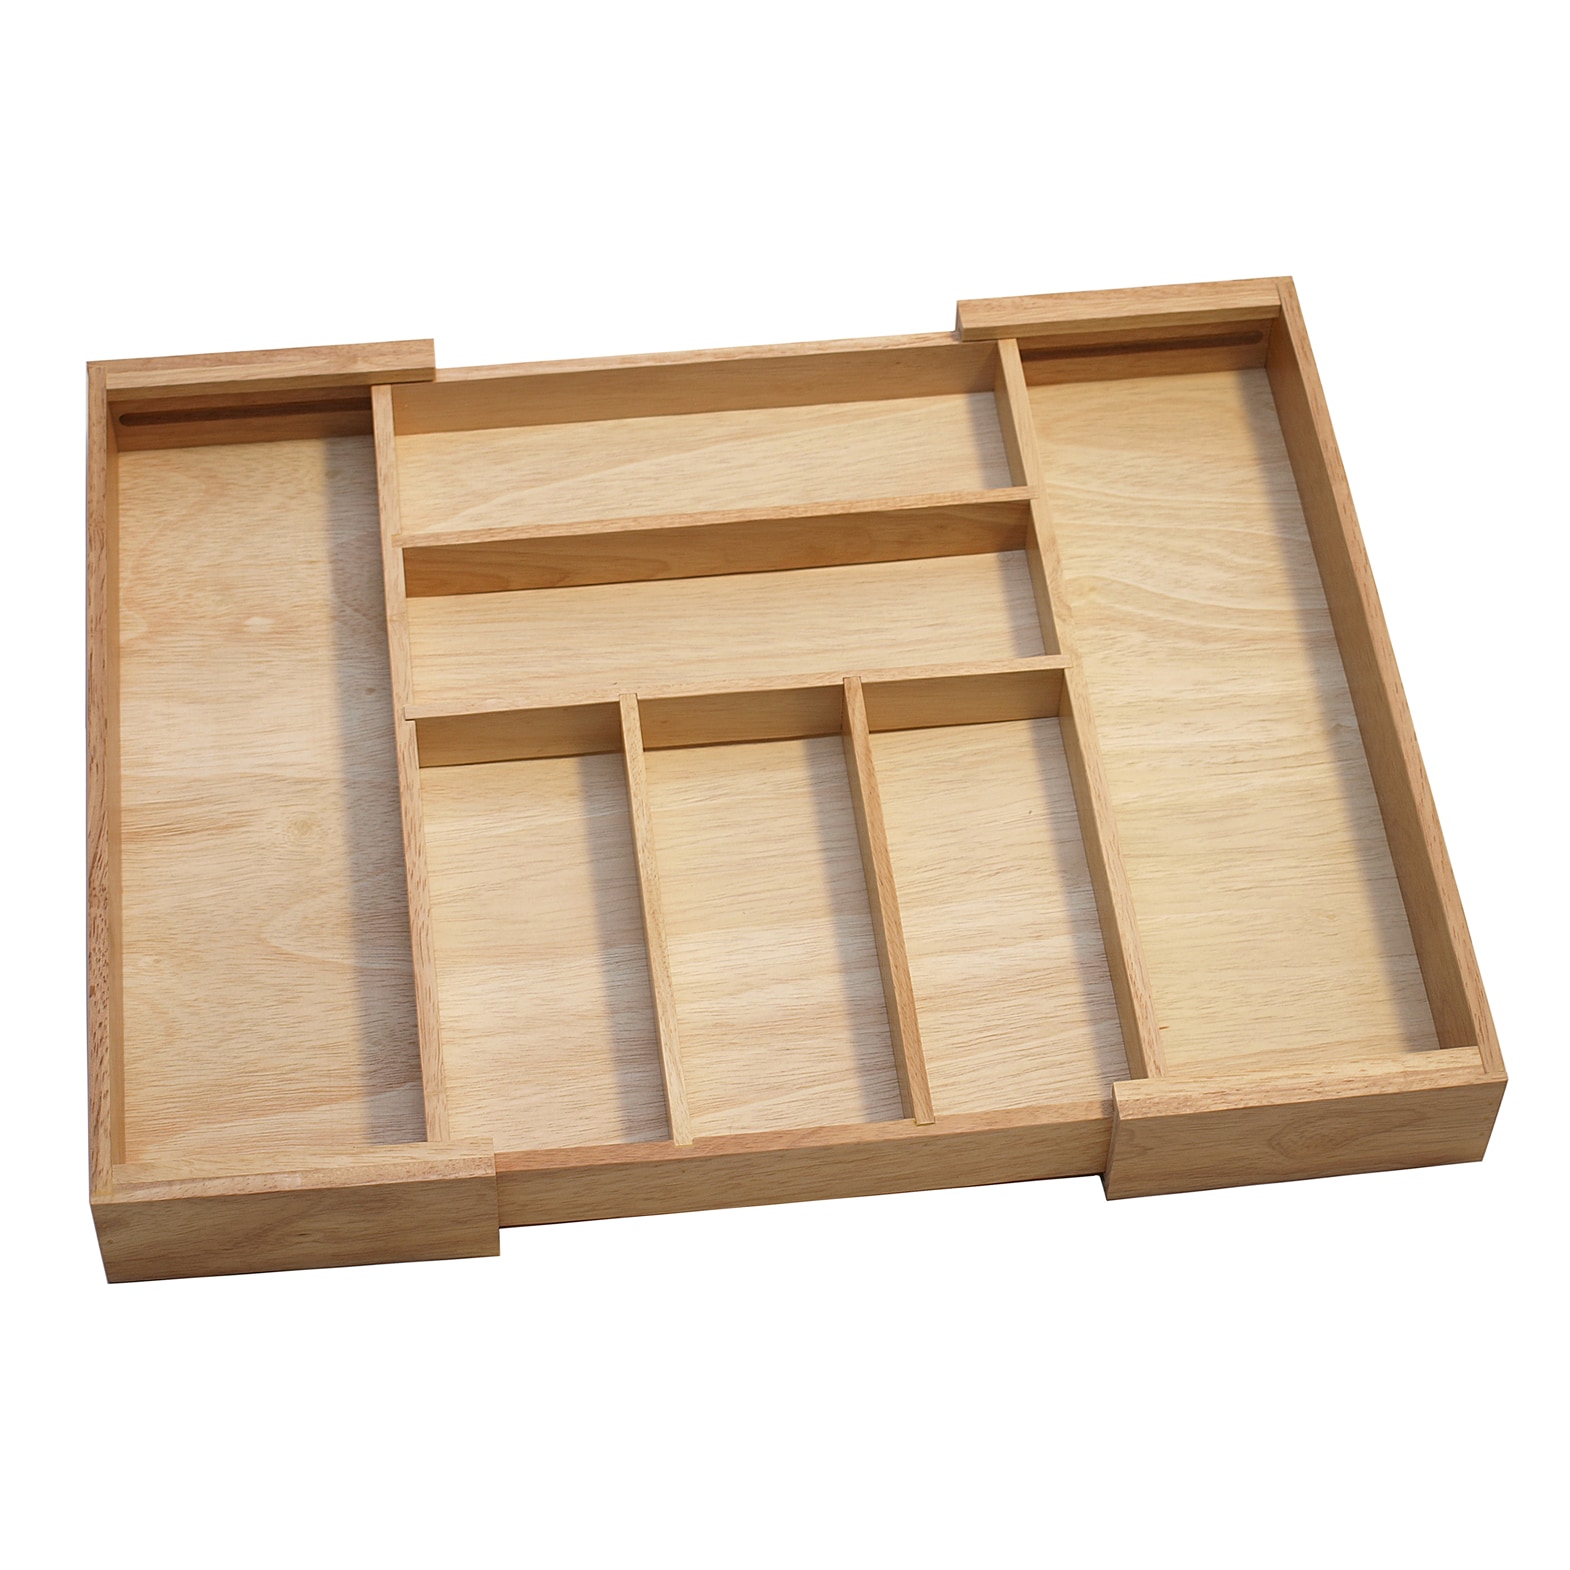 Wood Trim to Fit Drawer Utensil/Cutlery Tray Insert